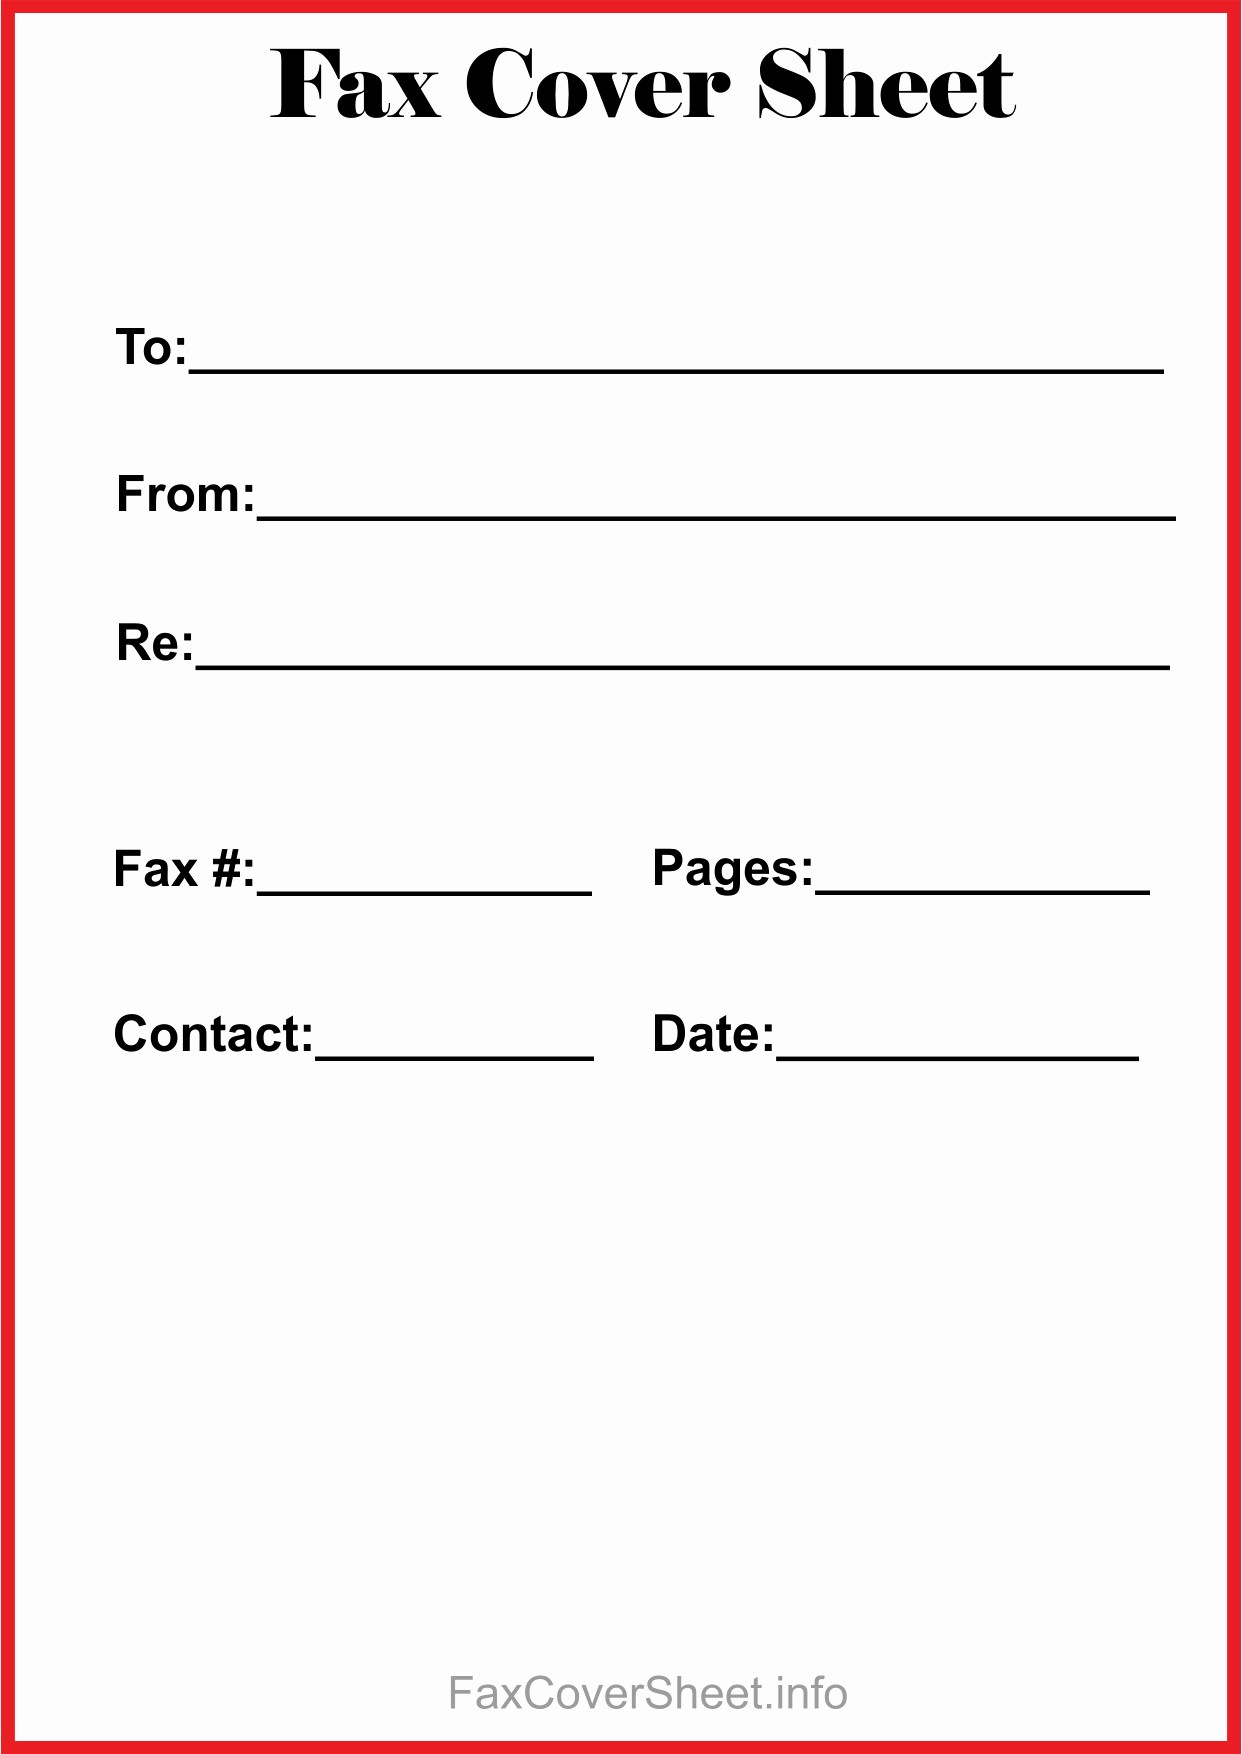 Cover Sheet for A Fax Unique Free Fax Cover Sheet Template Download